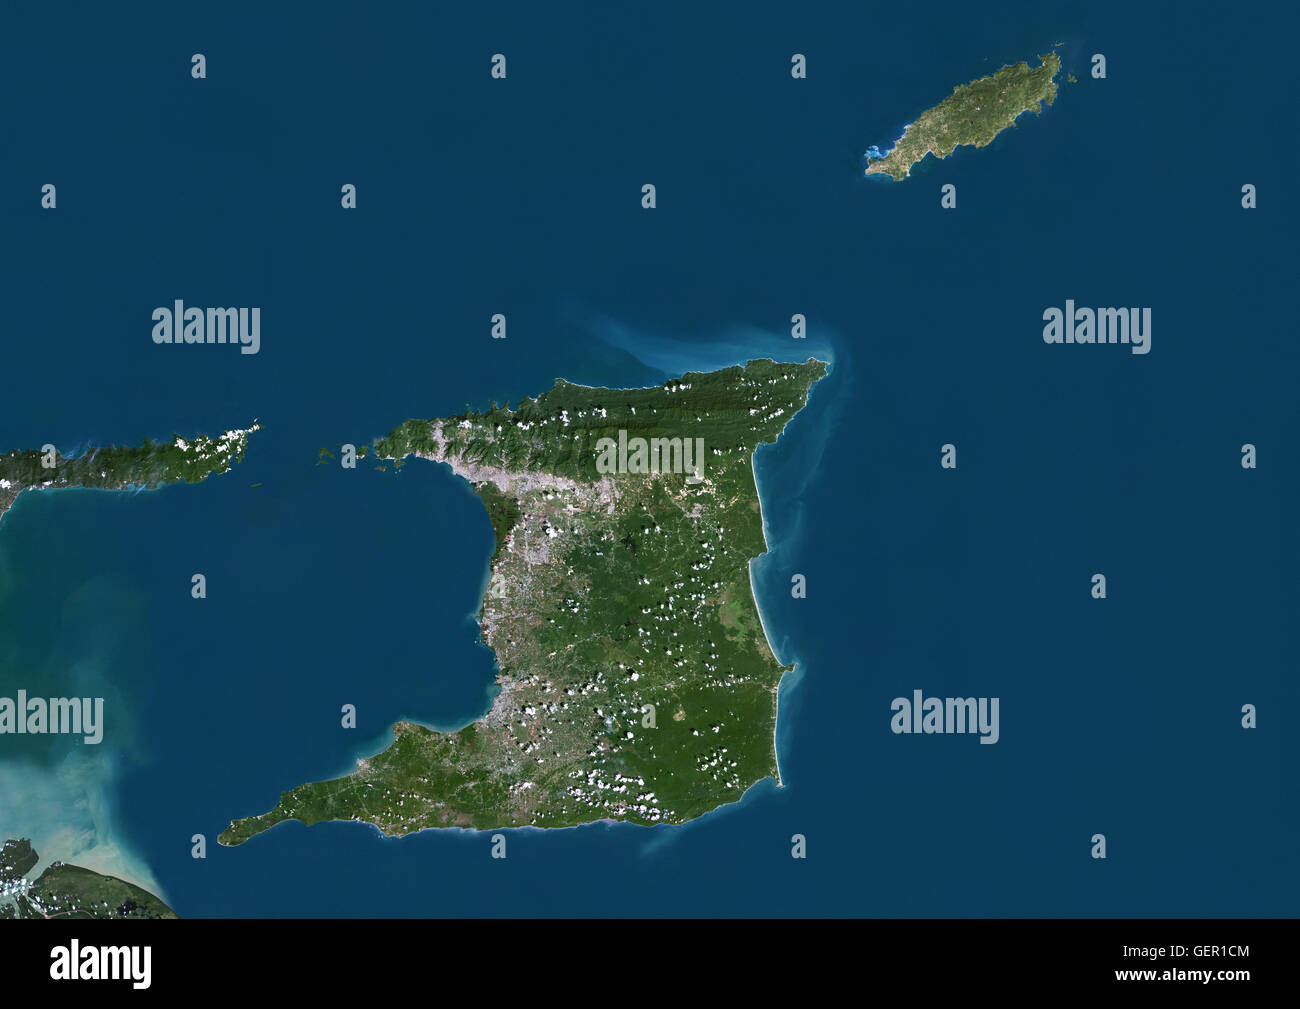 Satellite view of Trinidad and Tobago. This image was compiled from data acquired by Landsat satellites. Stock Photo